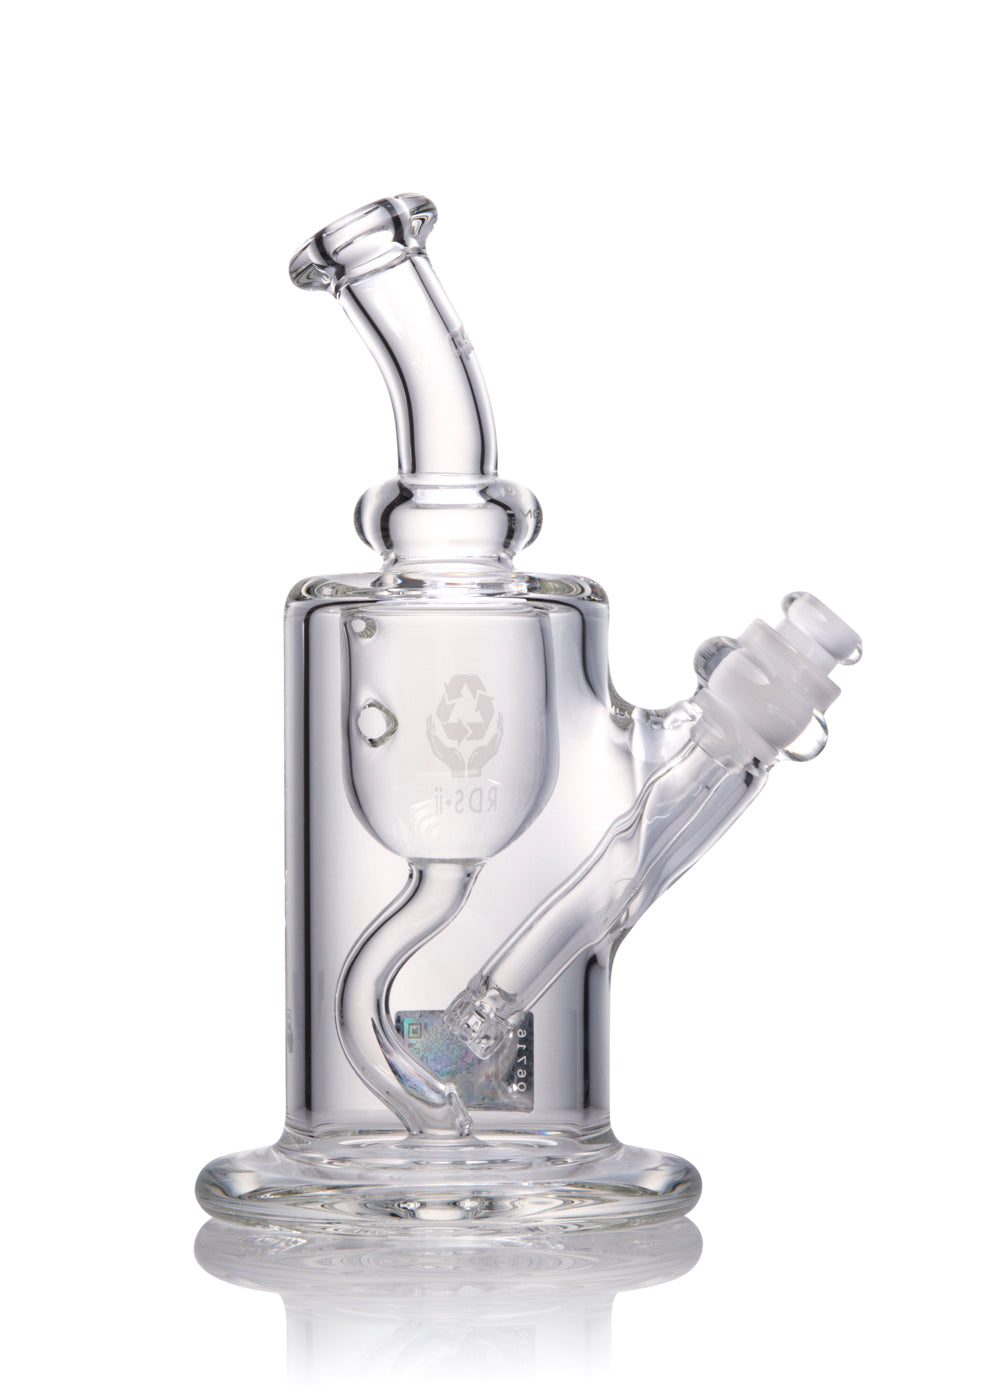 Mobius RDS II Removeable Downstem Cycler